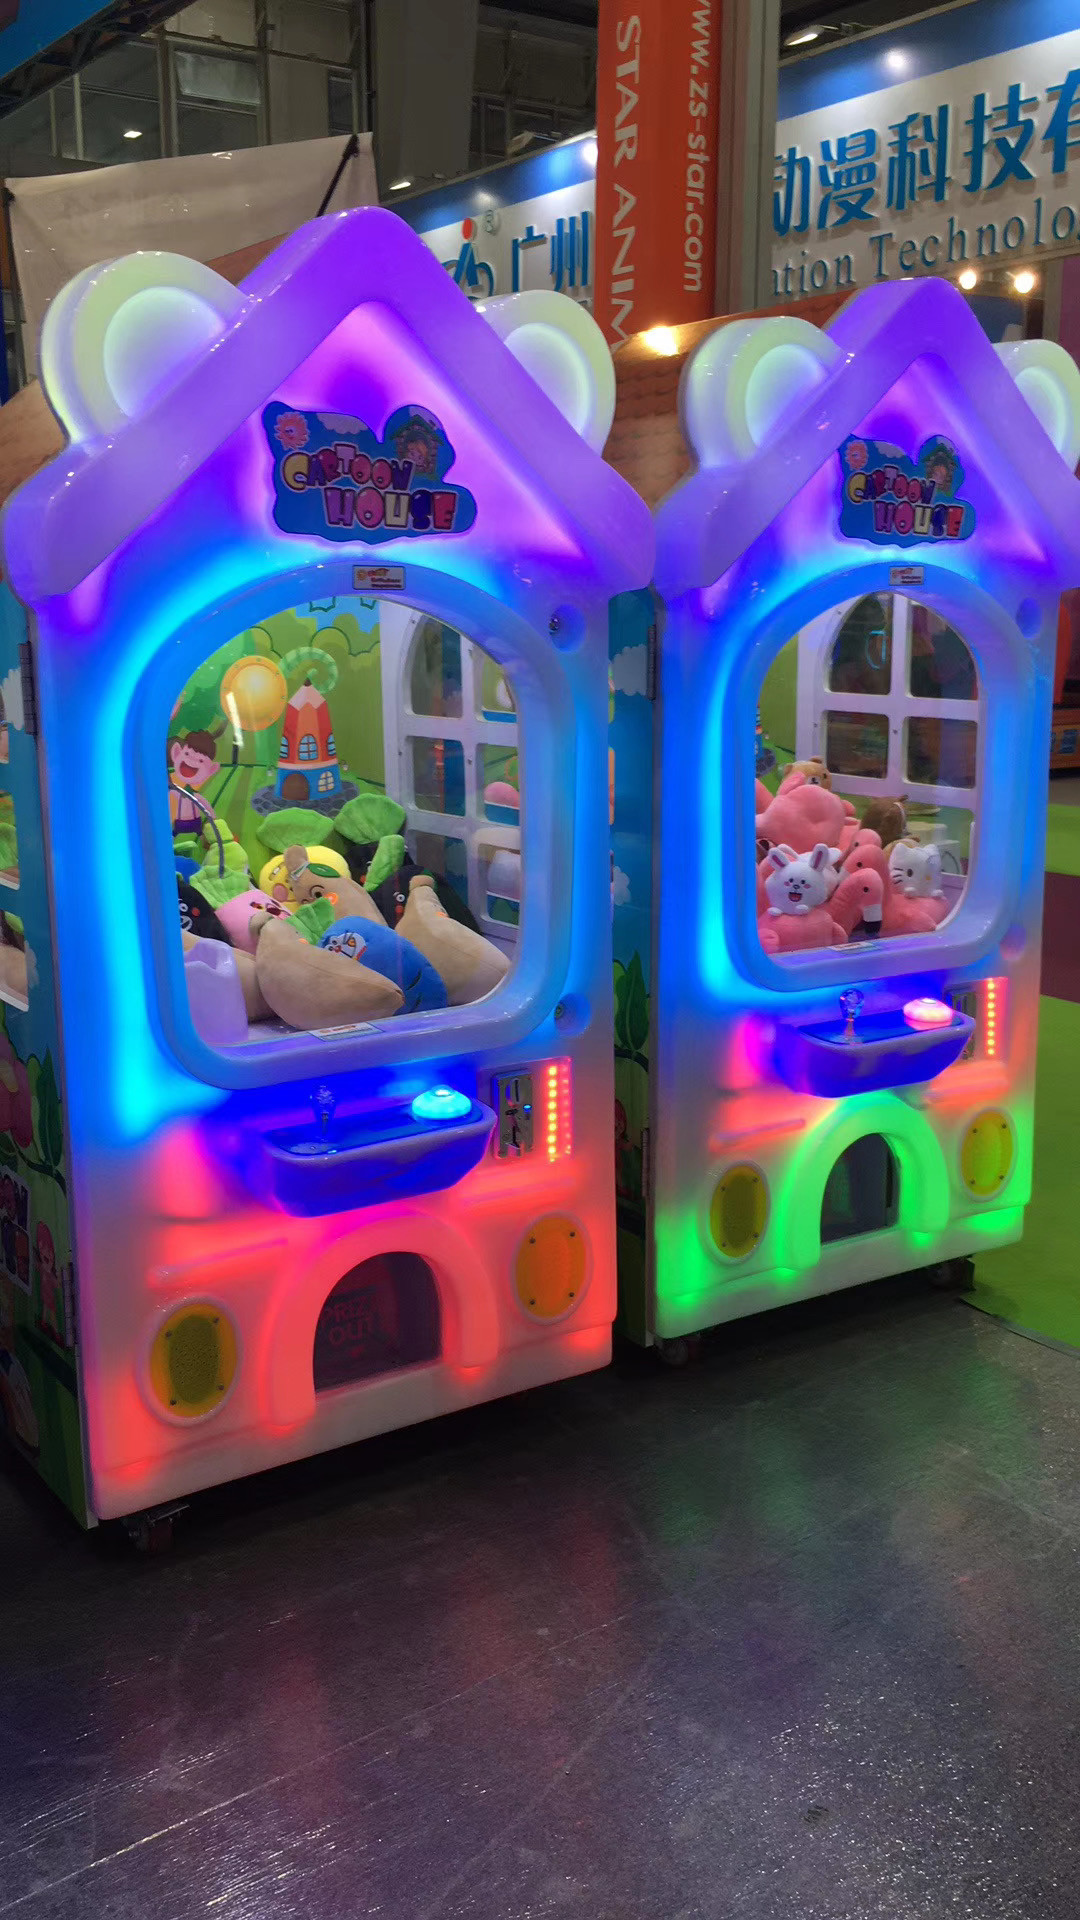 Cheap Crazy Toy Claw Vending Machine for sale